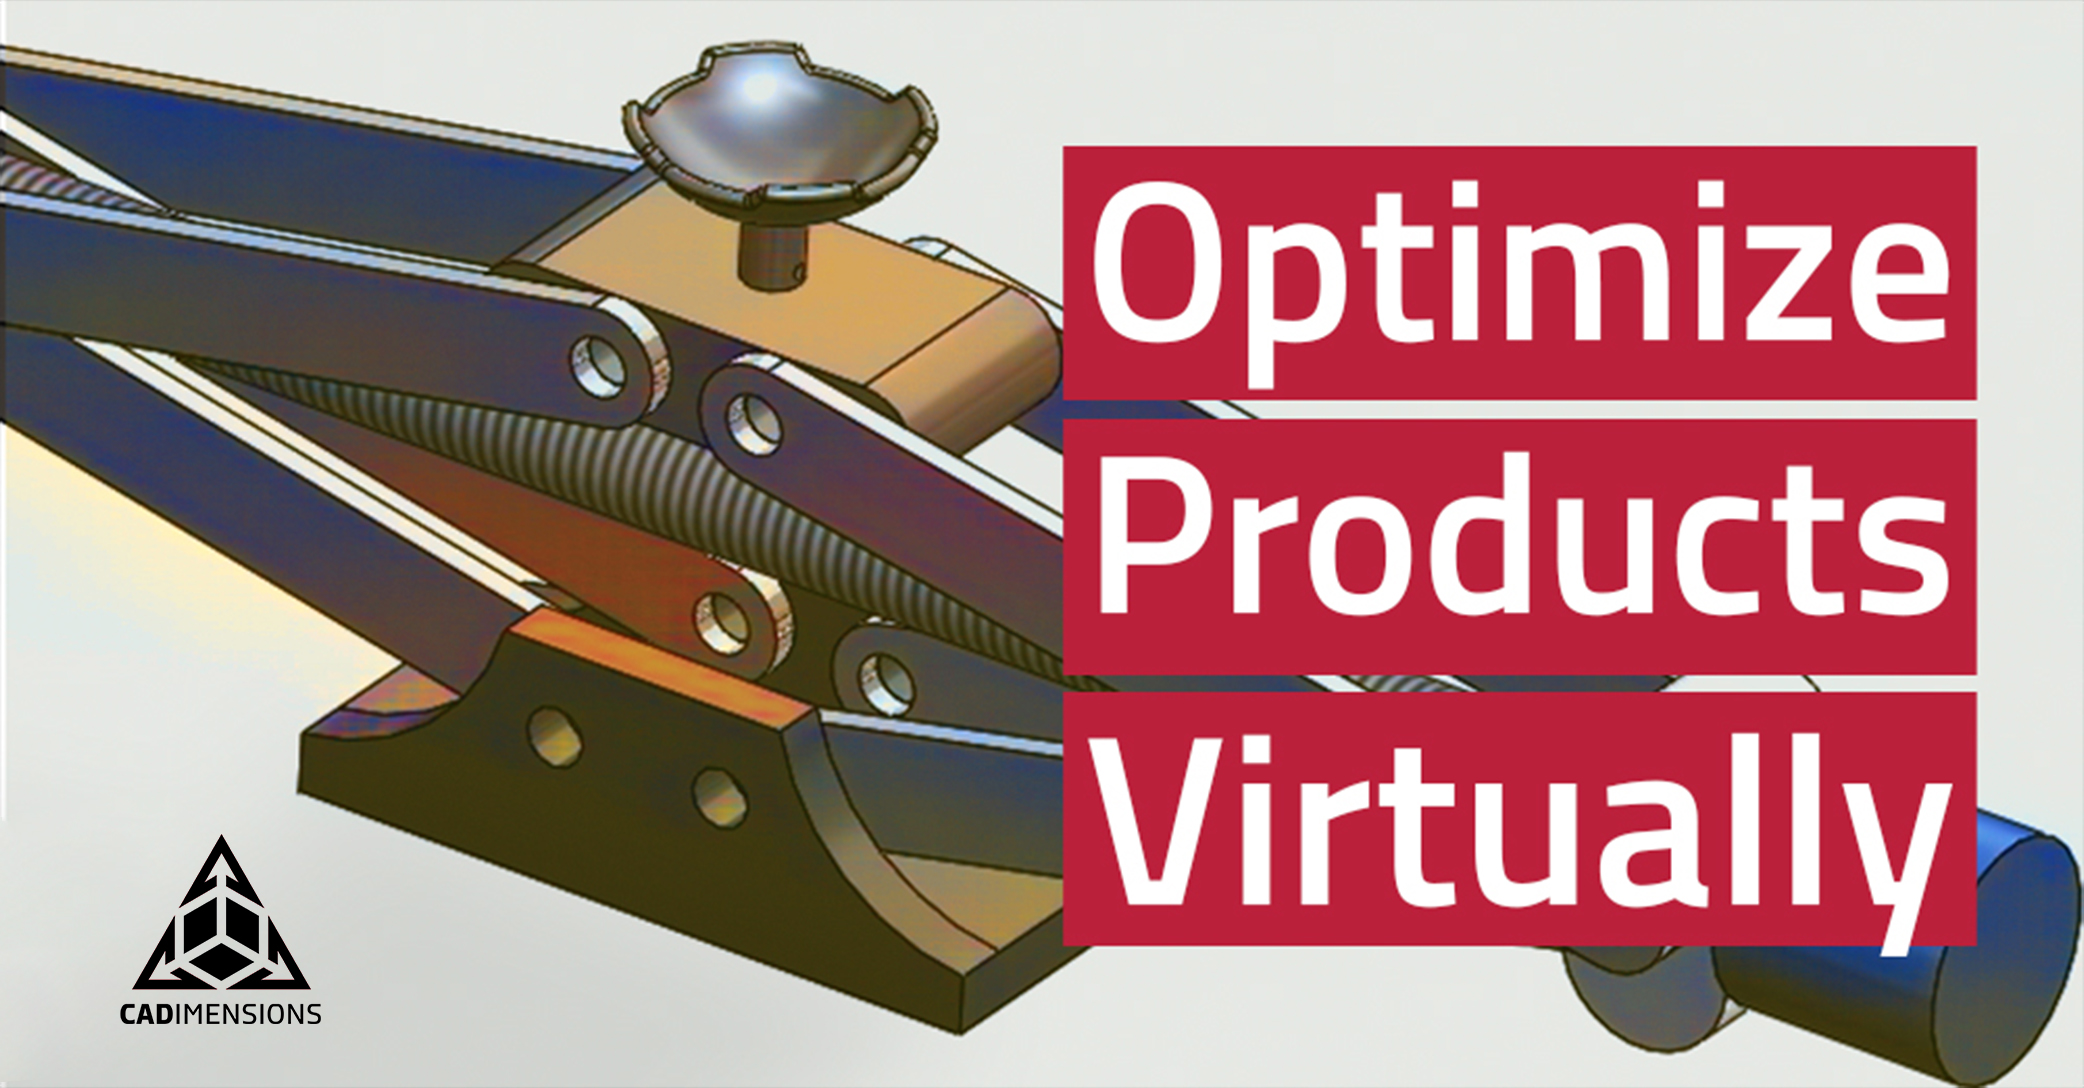 How Motion Simulation Can Help Optimize Products Virtually